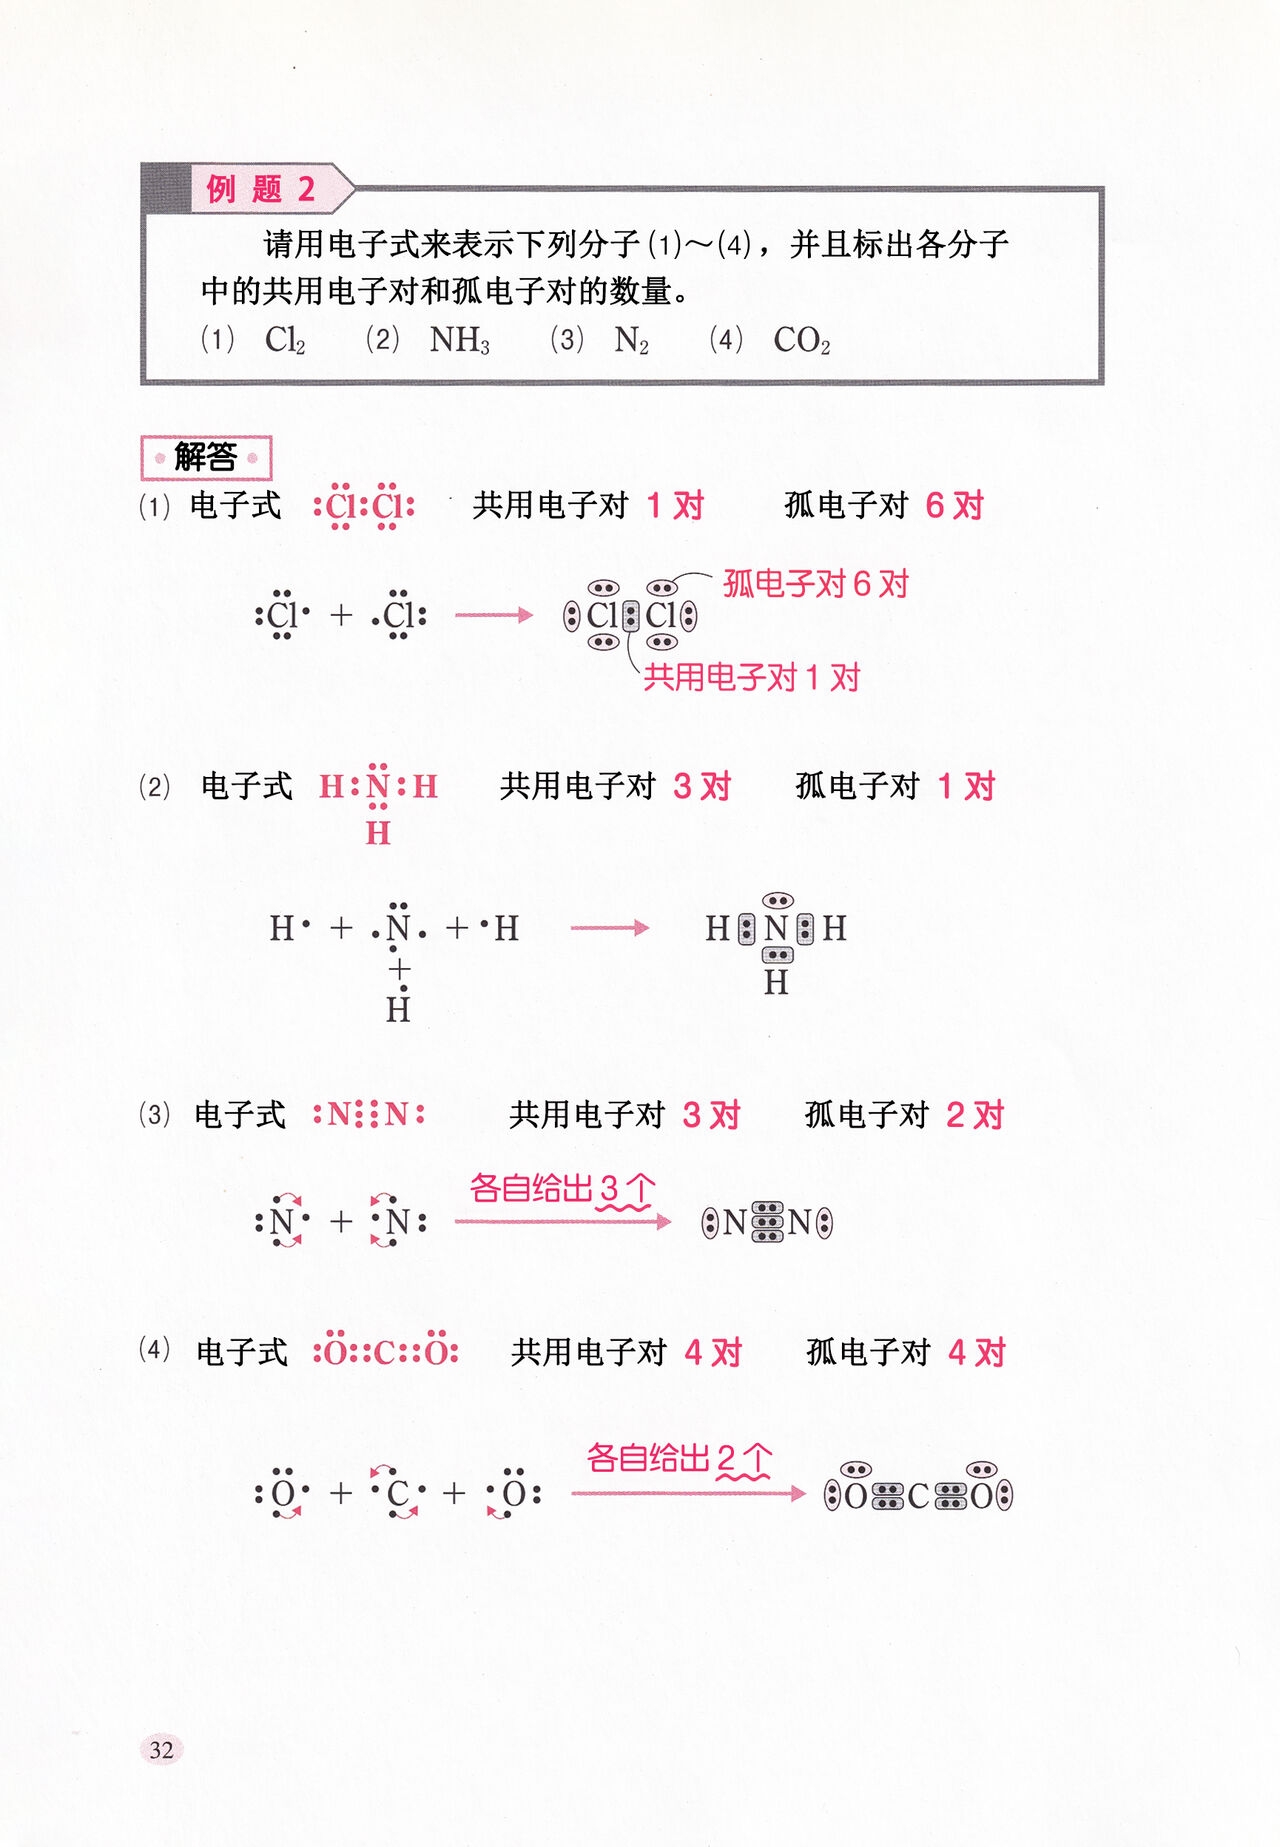 Let's Learn Chemistry with Lucky☆Star -Basic Theory- Section 1-5|和幸运星一起学化学 -理论篇- 第1-5章[Chinese][桃樹漢化組] 41